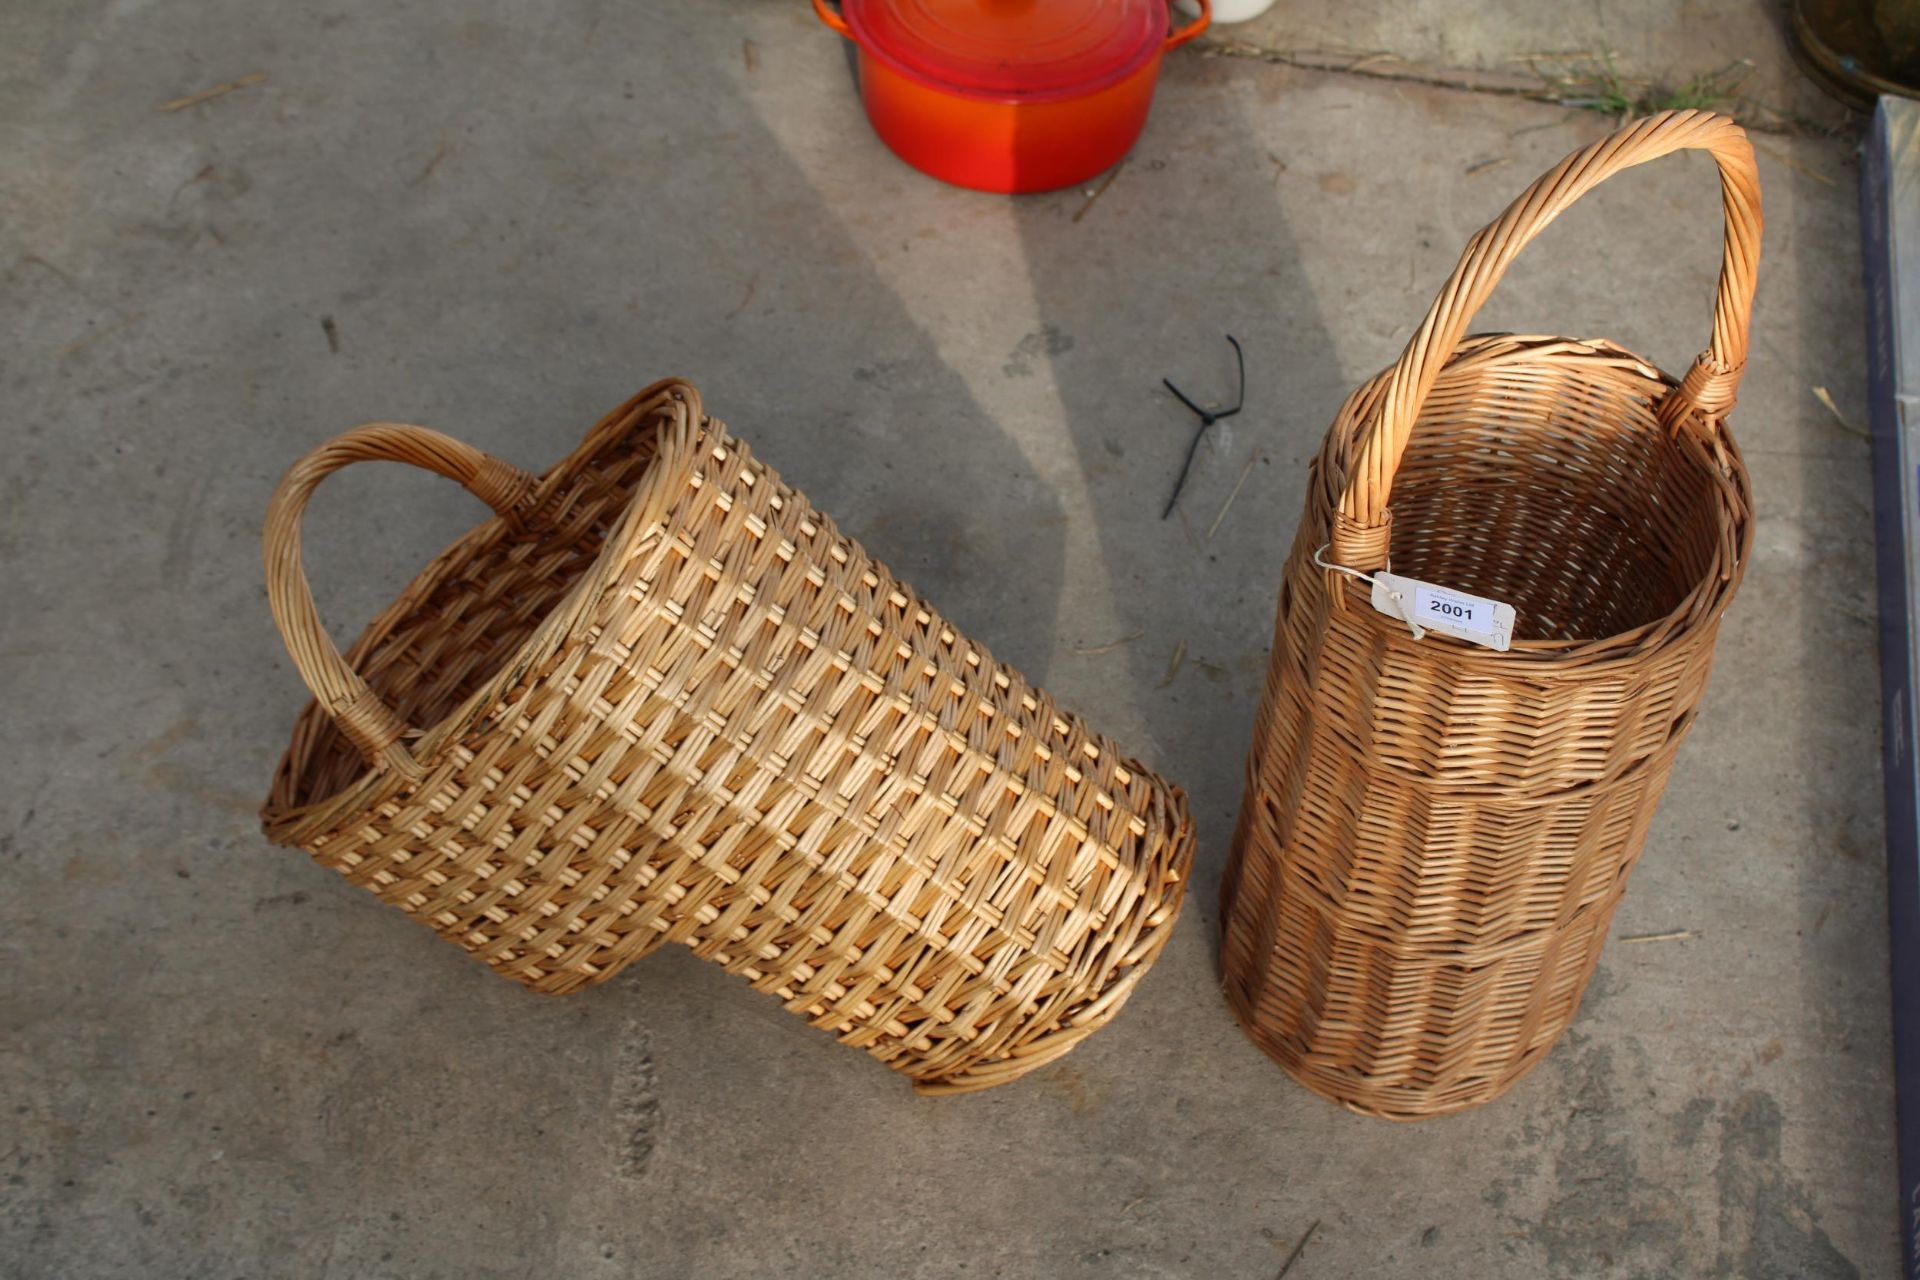 A TALL WICKER BASKET AND A STEPPED WICKER BASKET